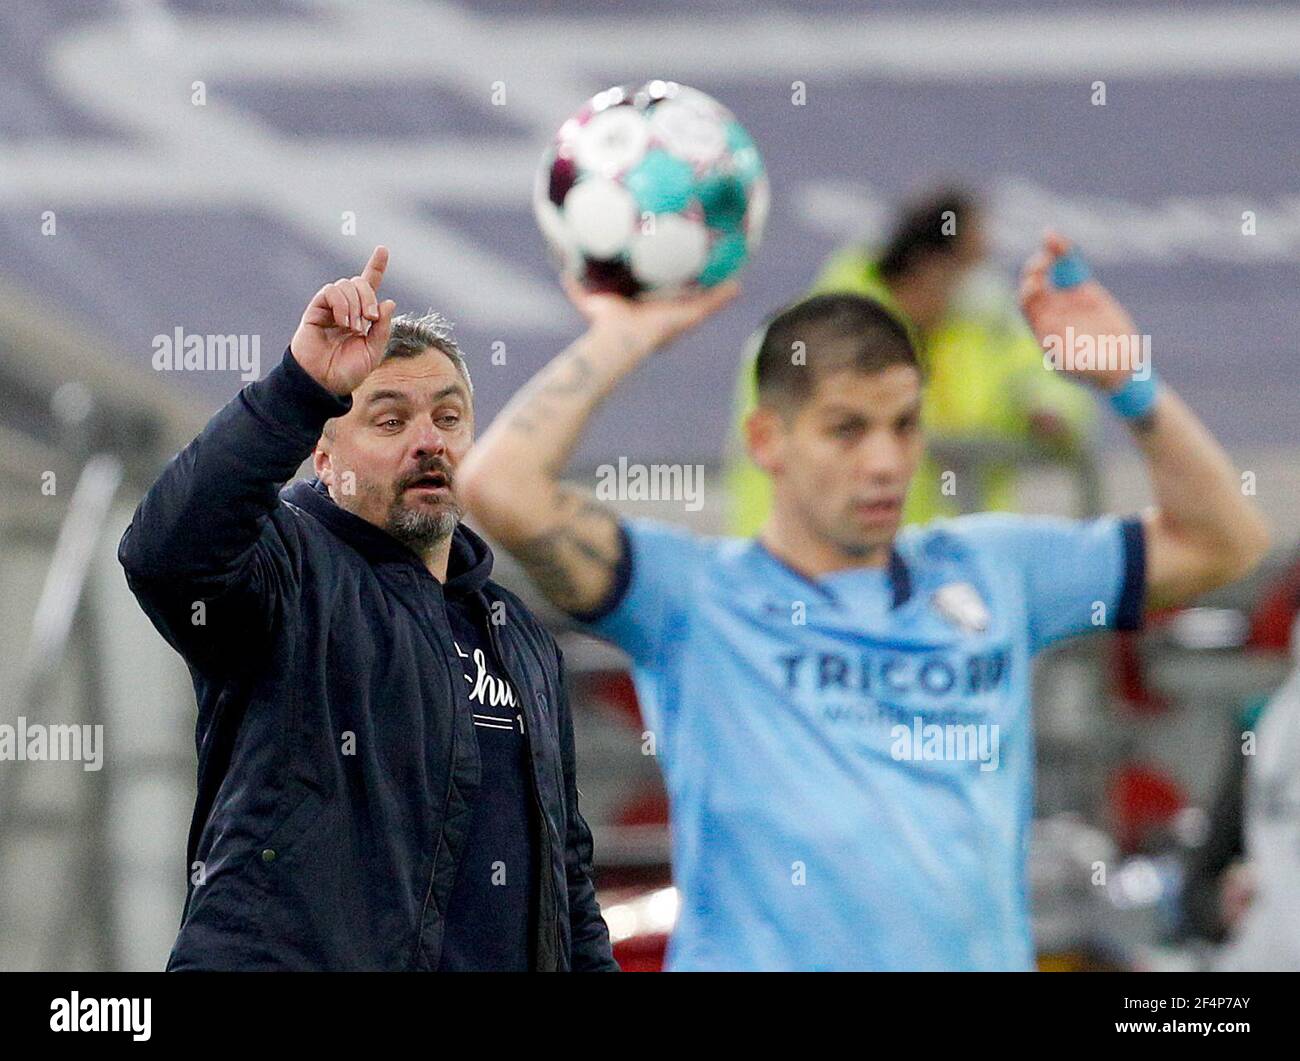 Duesseldorf, Germany. 22nd Mar, 2021. Football: 2nd Bundesliga, Fortuna Düsseldorf - VfL Bochum, Matchday 26 at Merkur Spiel-Arena. Bochum coach Thomas Reis (l) gestures, Bochum's Christian Gamboa Luna on the right during a throw-in. Credit: Roland Weihrauch/dpa - IMPORTANT NOTE: In accordance with the regulations of the DFL Deutsche Fußball Liga and/or the DFB Deutscher Fußball-Bund, it is prohibited to use or have used photographs taken in the stadium and/or of the match in the form of sequence pictures and/or video-like photo series./dpa/Alamy Live News Stock Photo